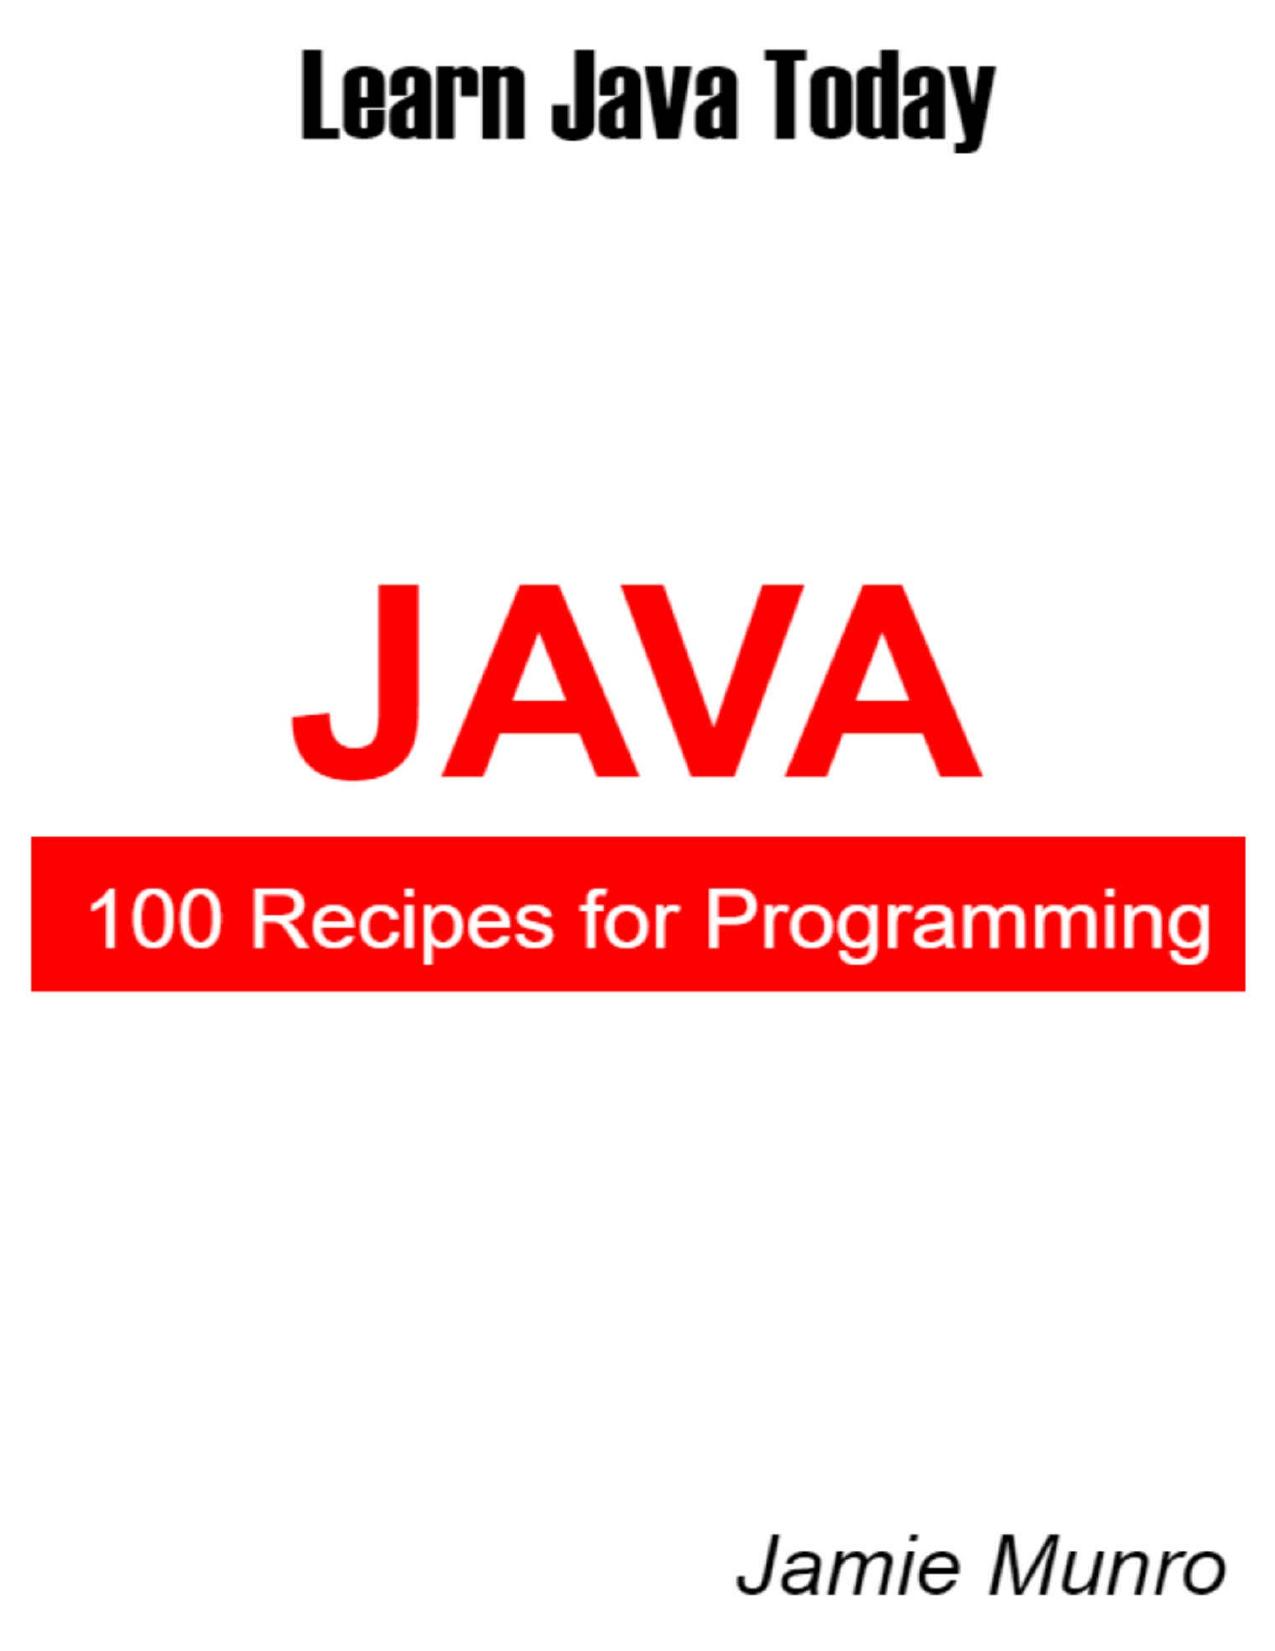 100 Recipes for Programming Java_ Learn Java Today.jpg